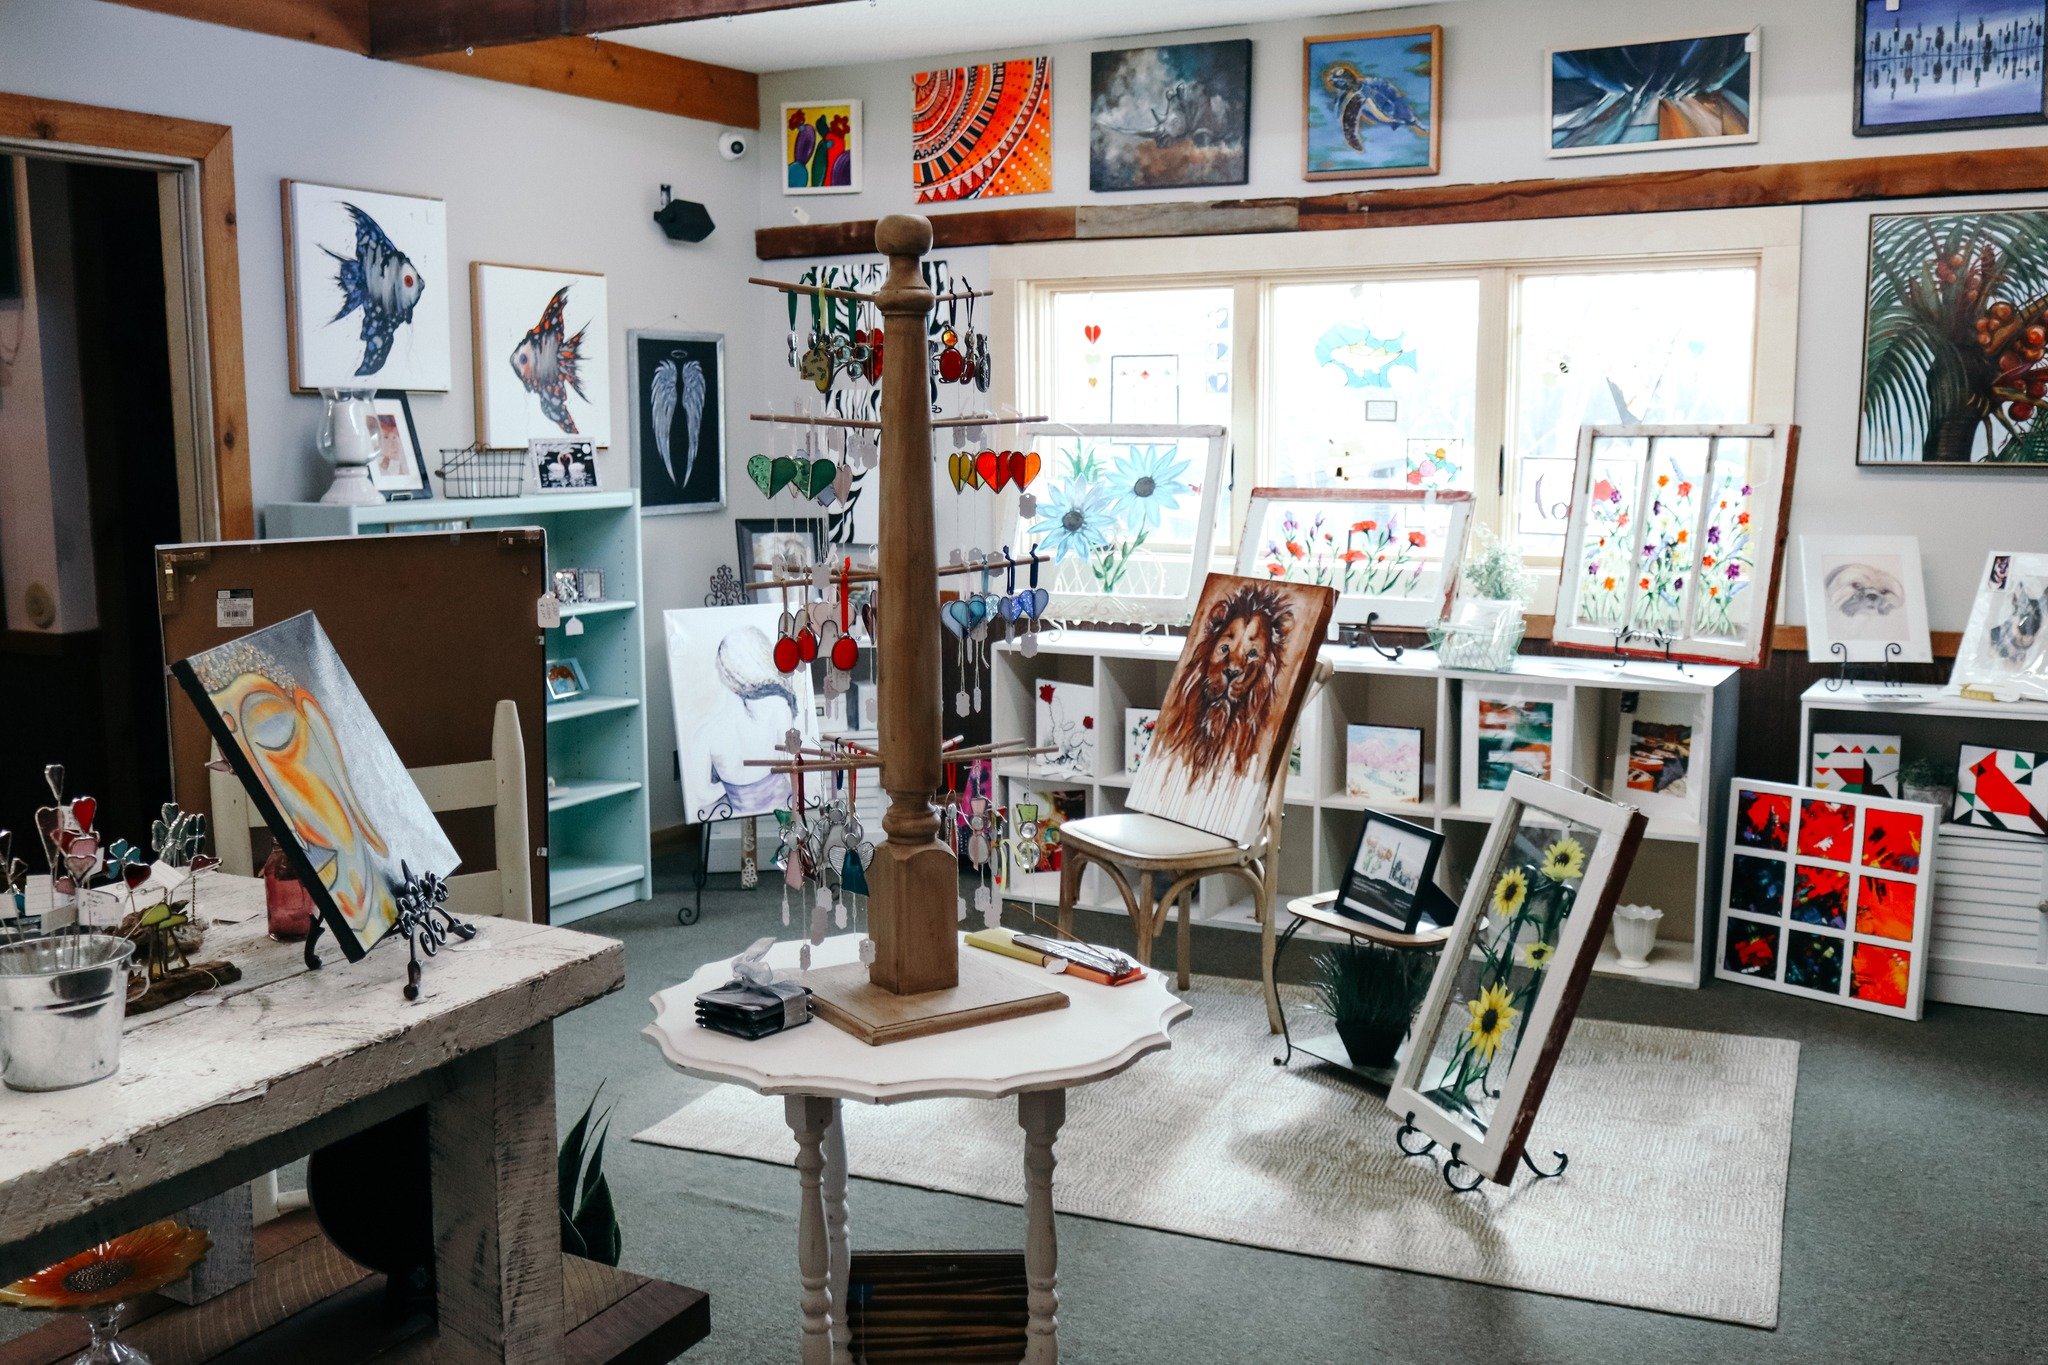 DISCOVER LOCAL ART AT PRESTIGE 🎨

We are proud to feature beautiful creative pieces throughout our rustic market. Stop in and discover them for yourself! You can join us every Wednesday - Sunday beginning at 10AM.

www.prestigecreativemarkets.com | 